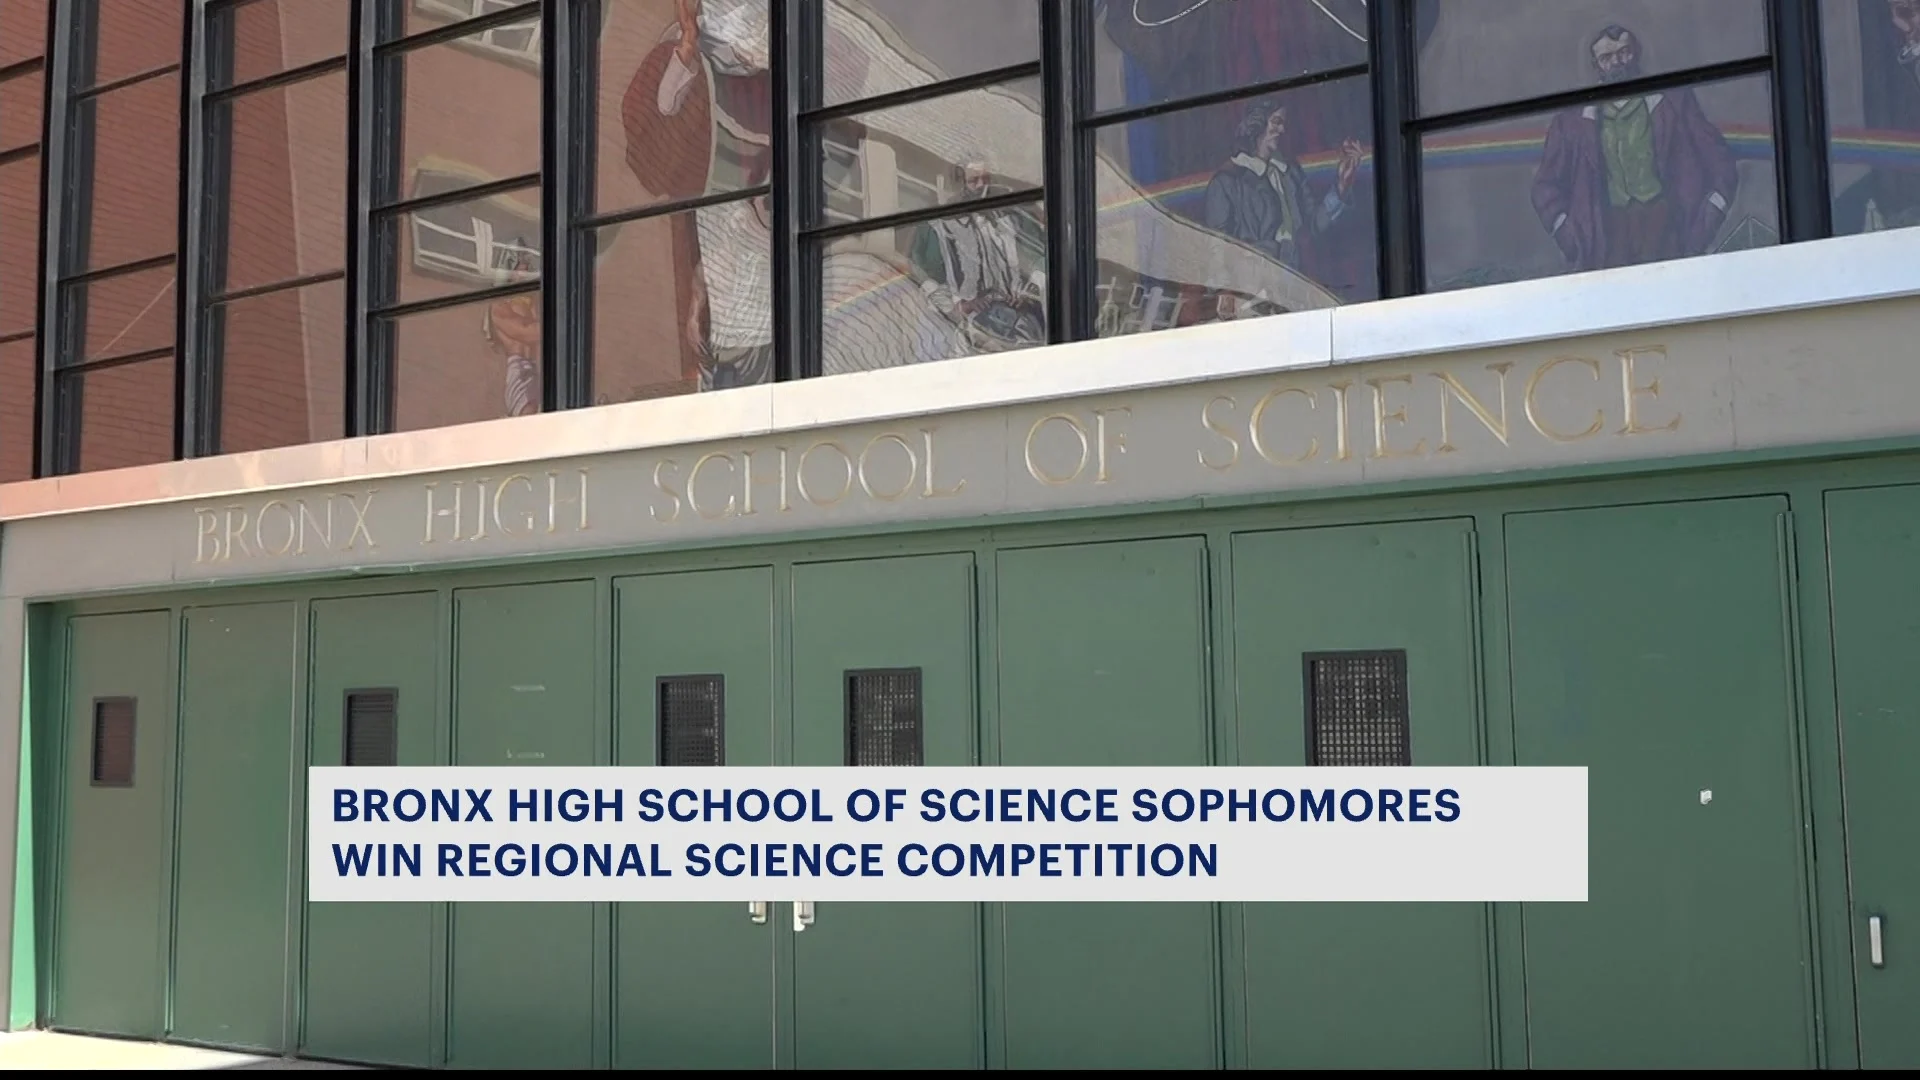 Trio from Bronx High School of Science claims first place in regional science competition